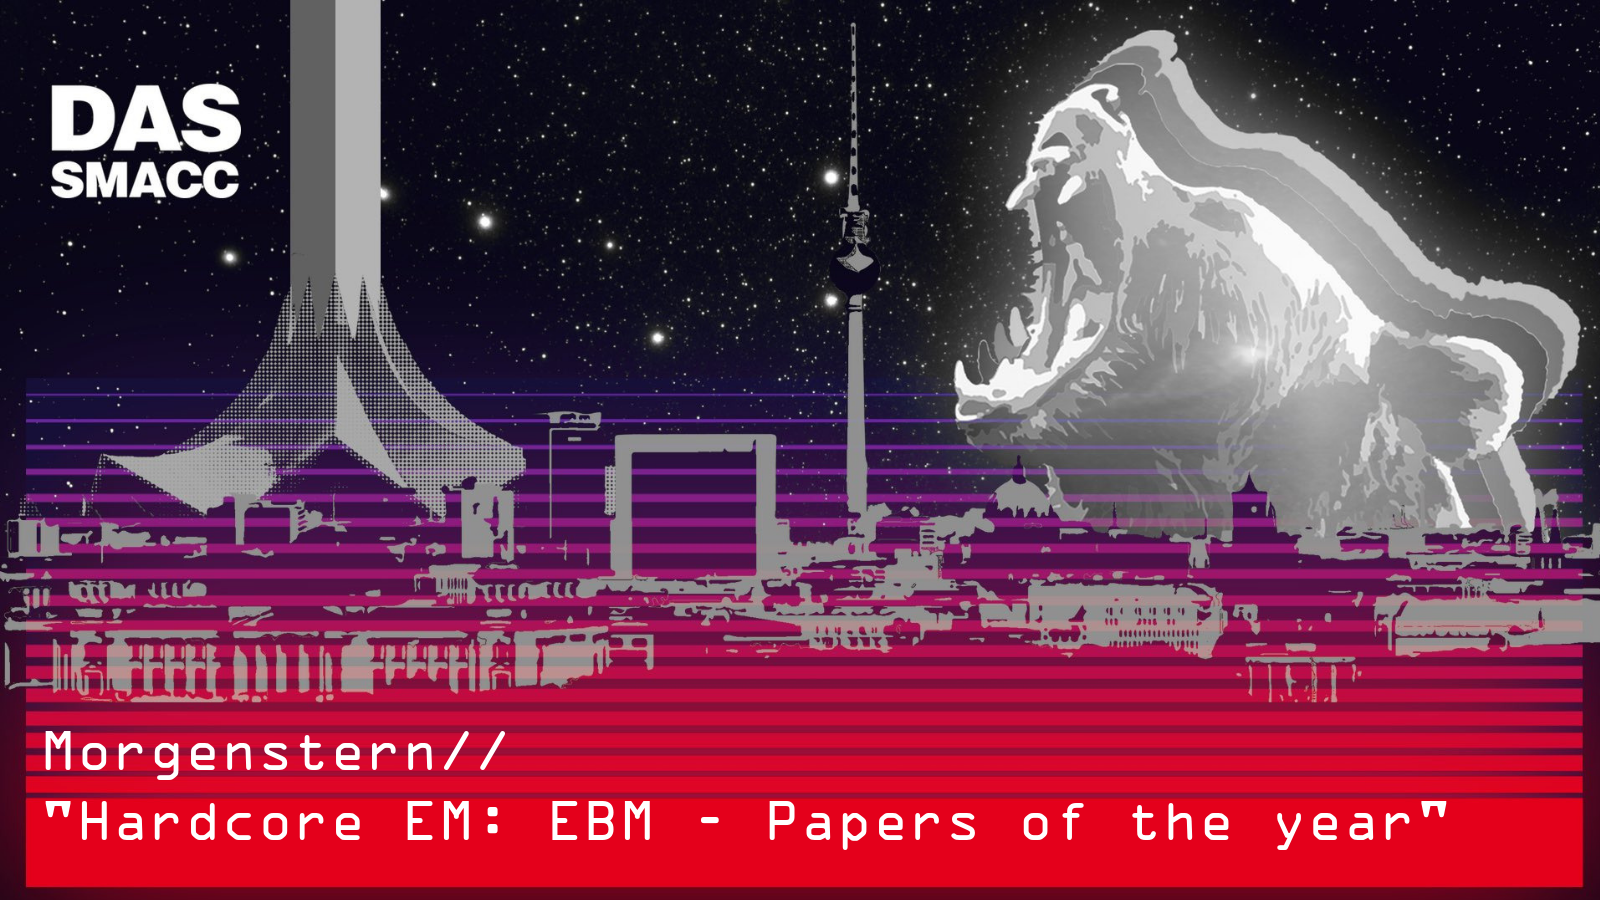 EBM: Papers of the year